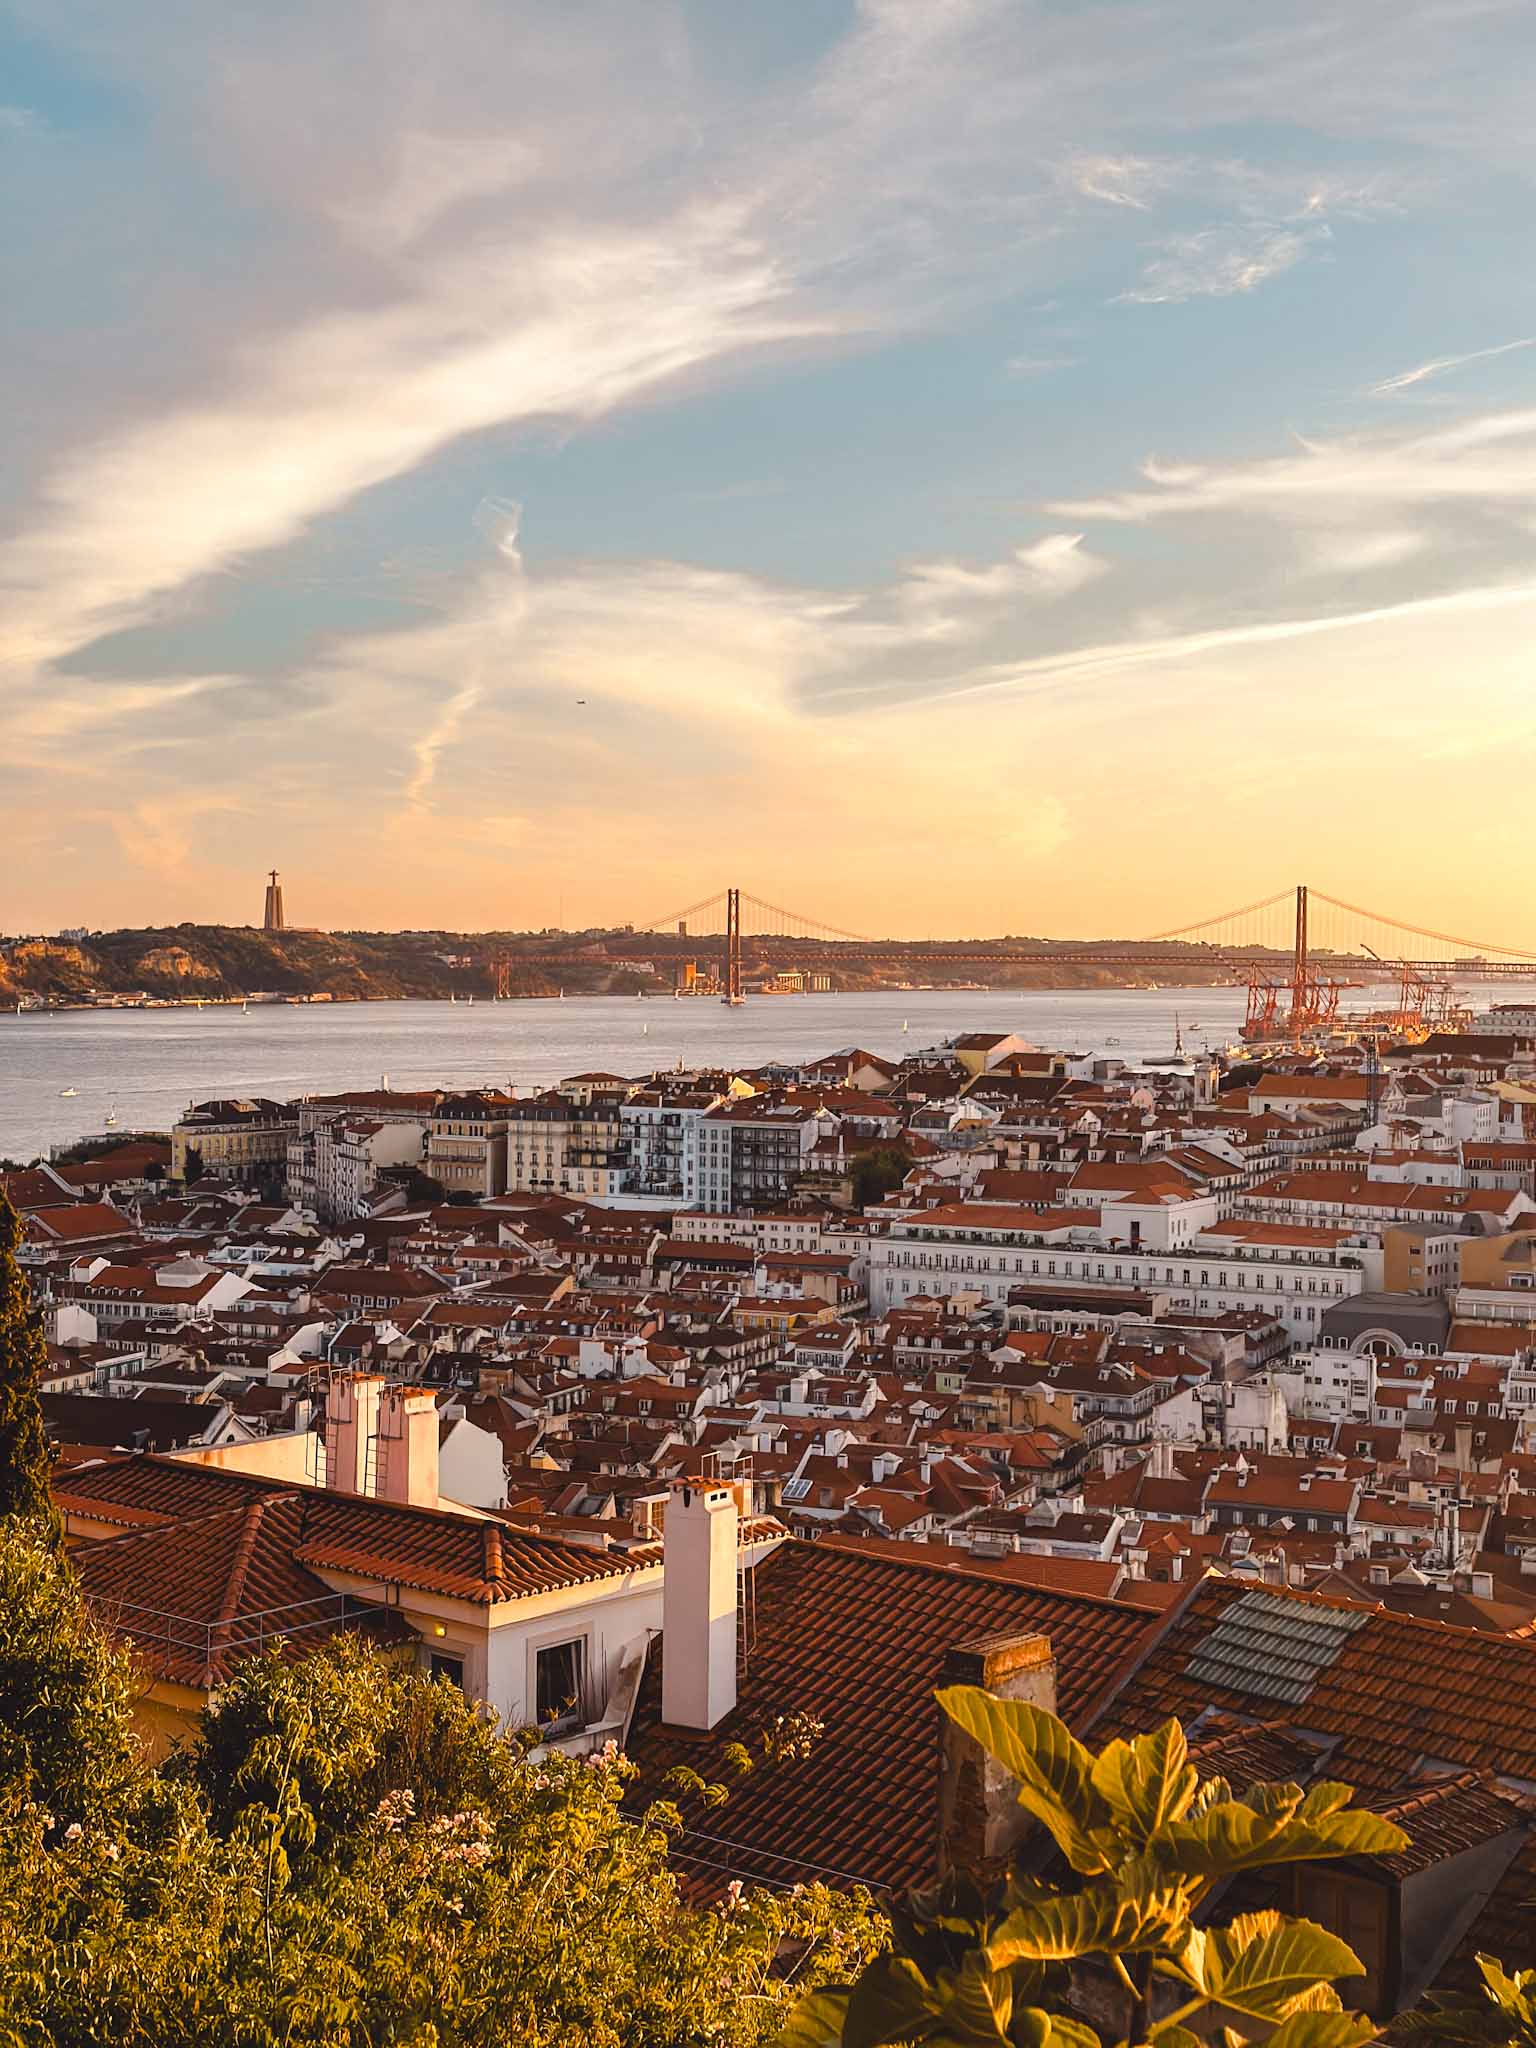 Best viewpoints and rooftops in Lisbon to see the city from above - Castelo de São Jorge